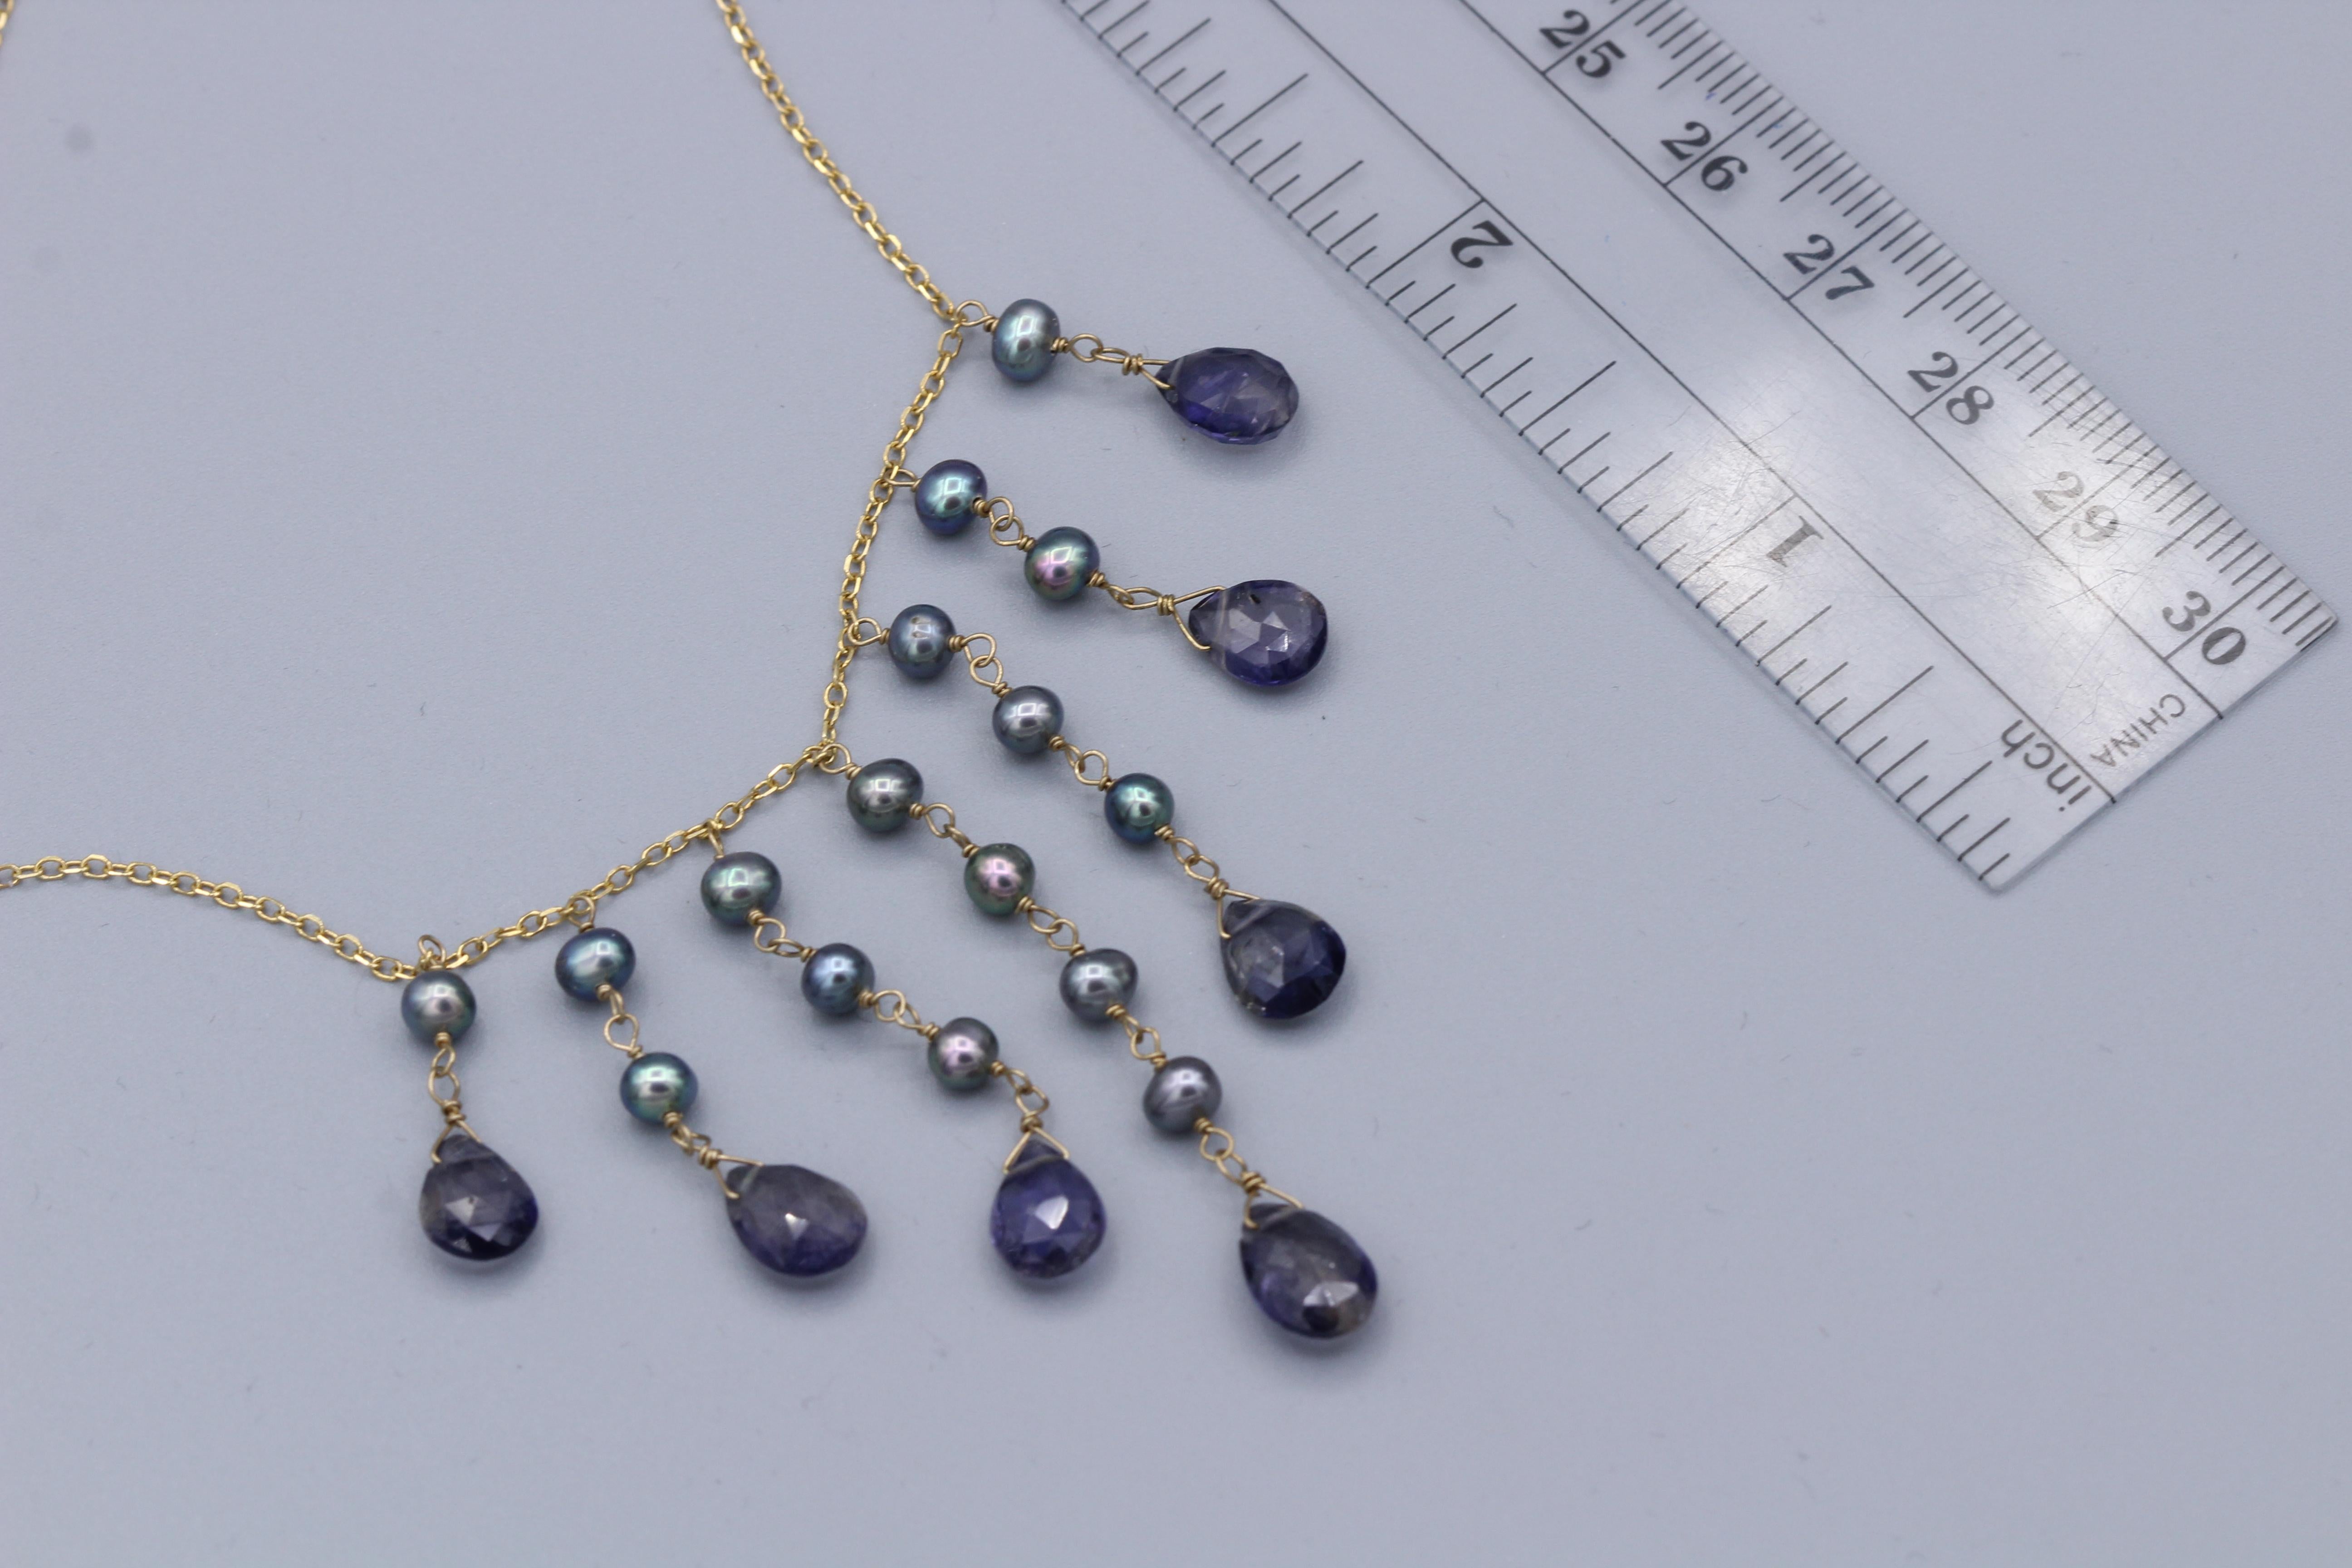 Briolette Cut Dangling Necklace Blue Amethyst & Pearls Dangle Style 14 Karat Yellow Gold For Sale